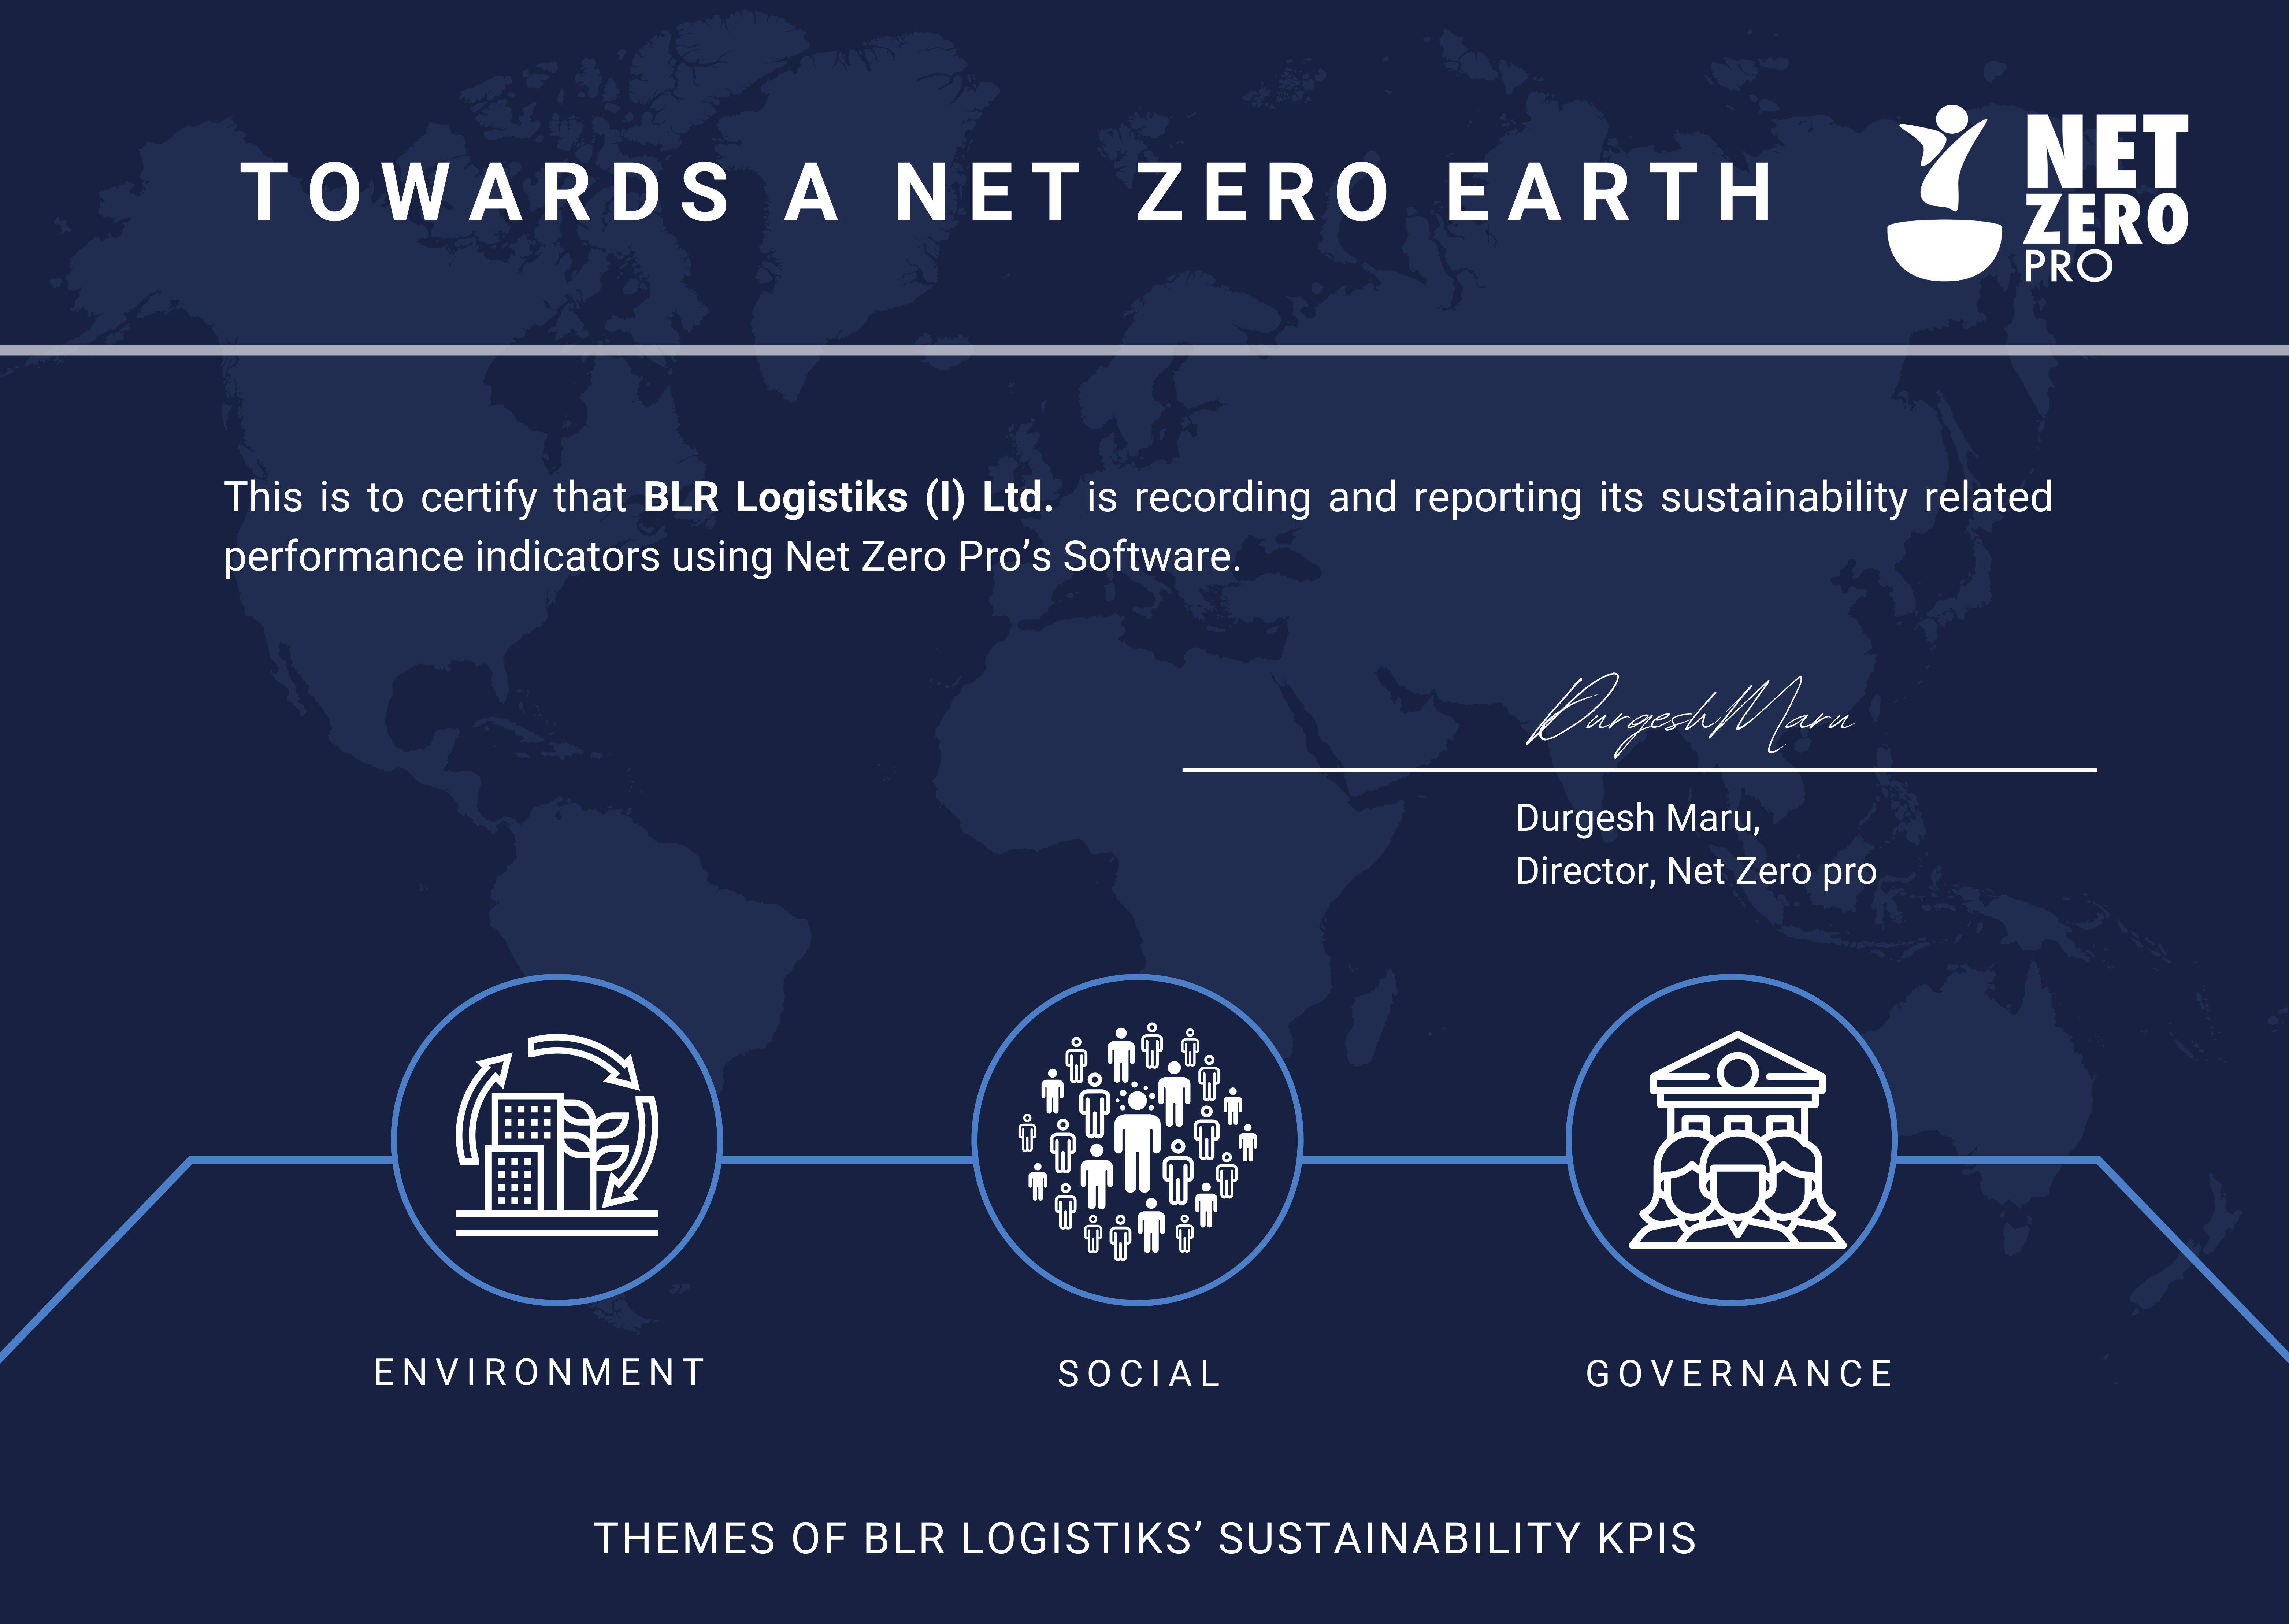 BLR Logistics Services Company In India Uses Sustainability KPIs